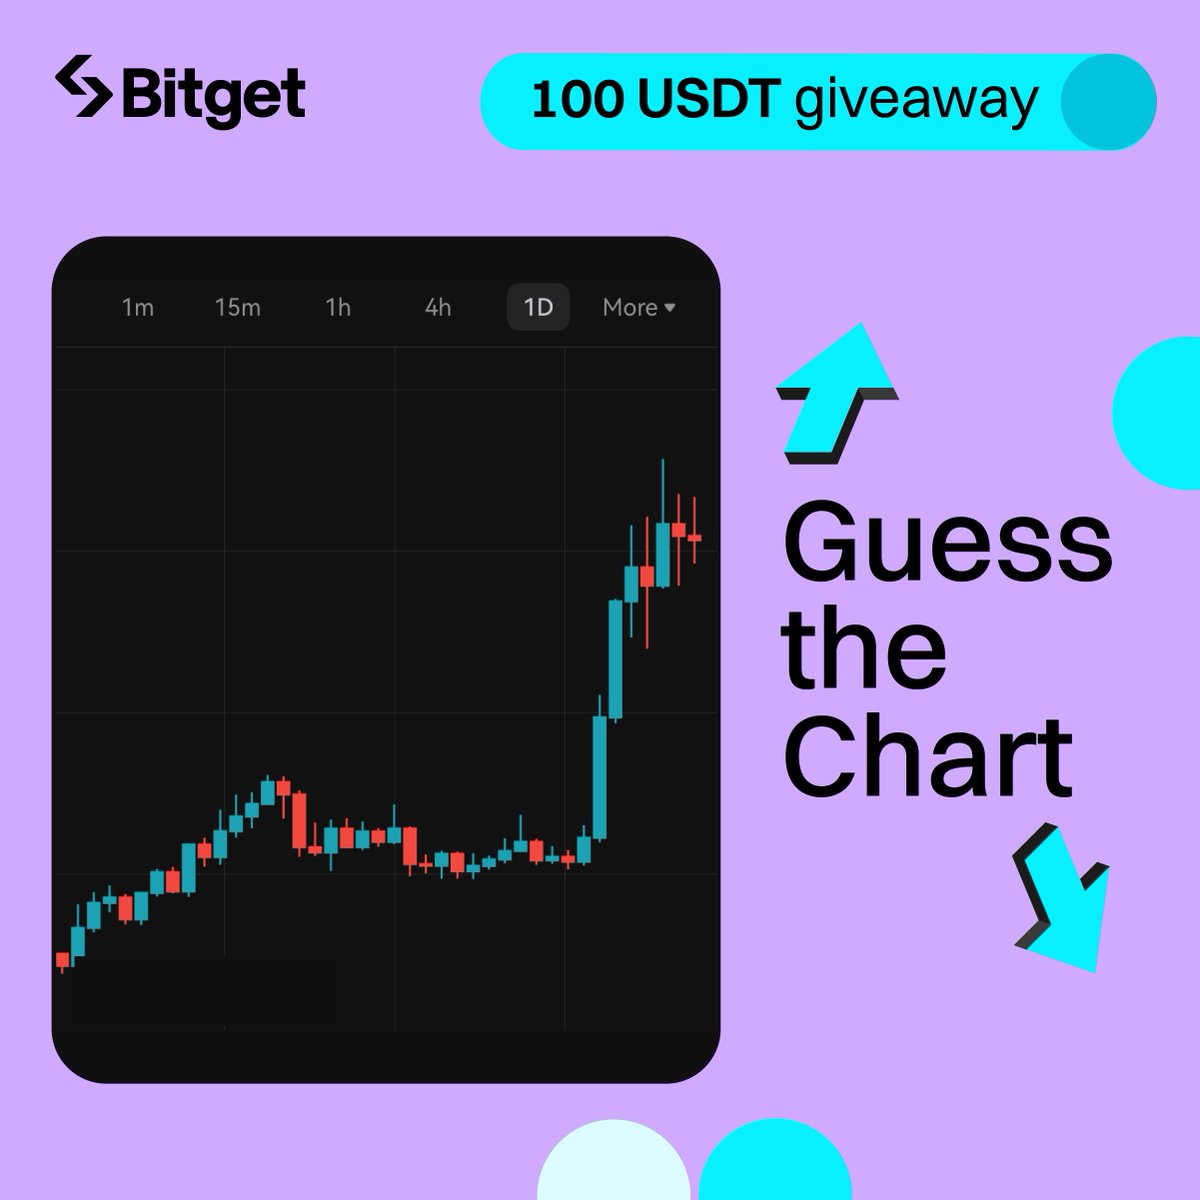 💰 Join the $100 GIVEAWAY! 🧐 Decode the chart! Share your guess for the featured #crypto with the hashtag #BitgetChallenge! ✅ Follow @bitgetglobal ✅ Repost & tag 3 friends 🎁 5 lucky winners will each receive 20 $USDT!